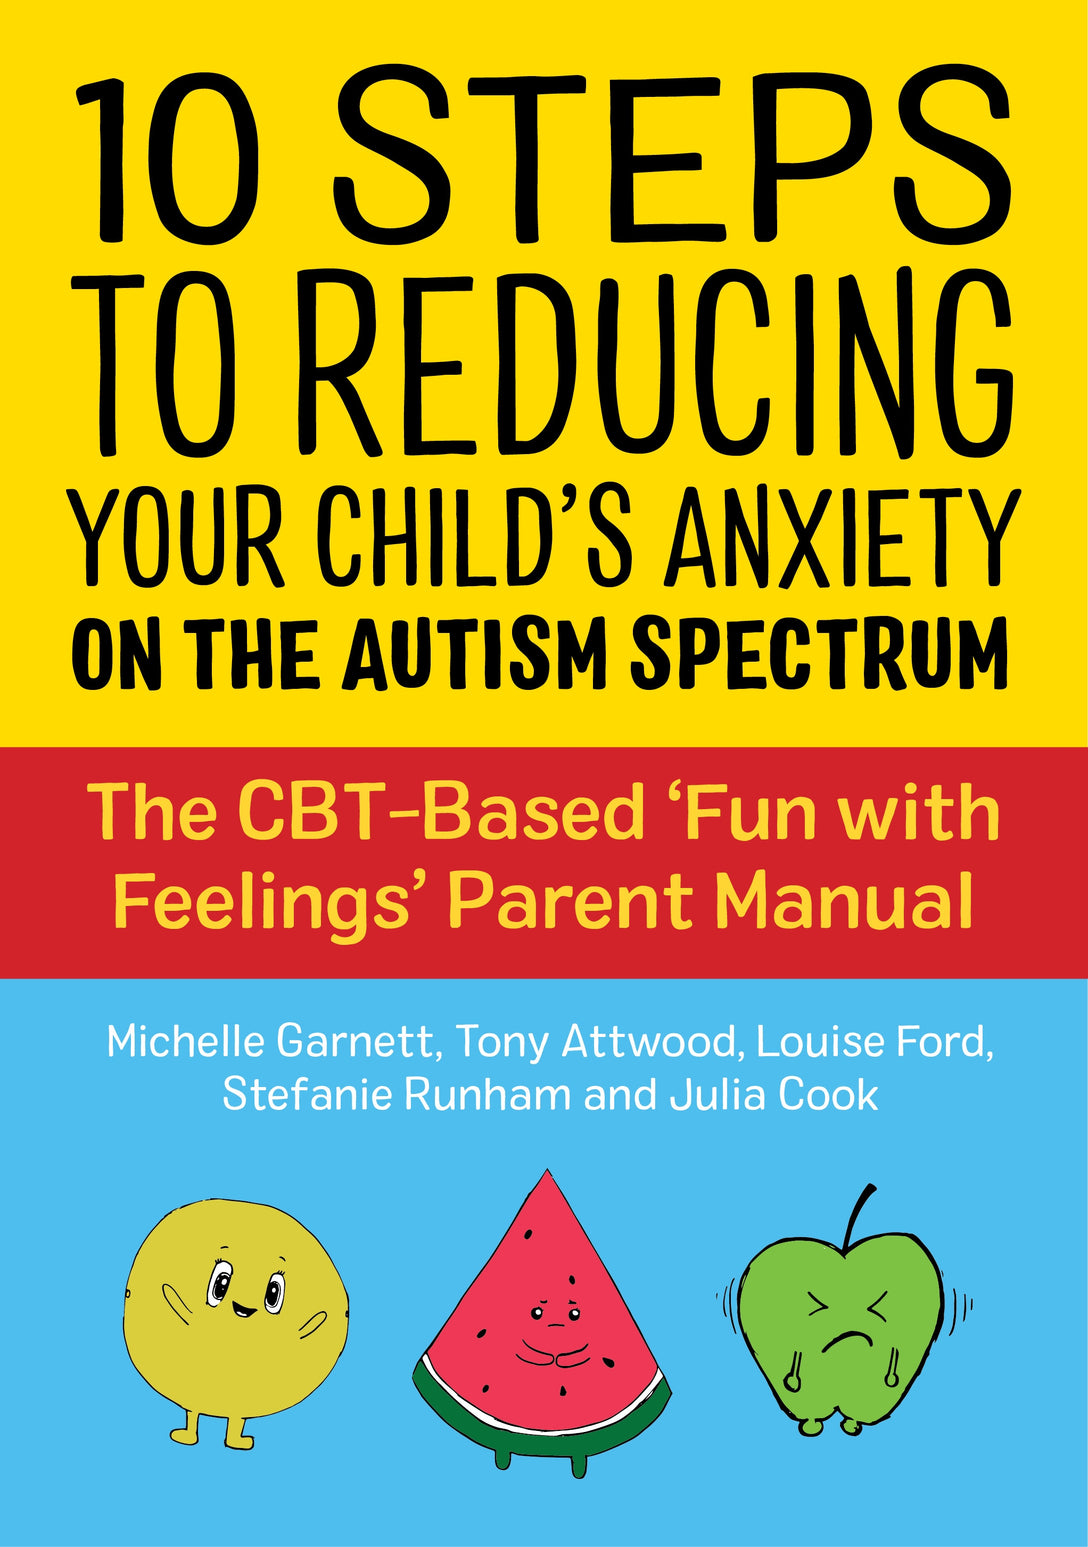 10 Steps to Reducing Your Child's Anxiety on the Autism Spectrum by Michelle Garnett, Dr Anthony Attwood, Louise Ford, Julia Cook, Stefanie Runham